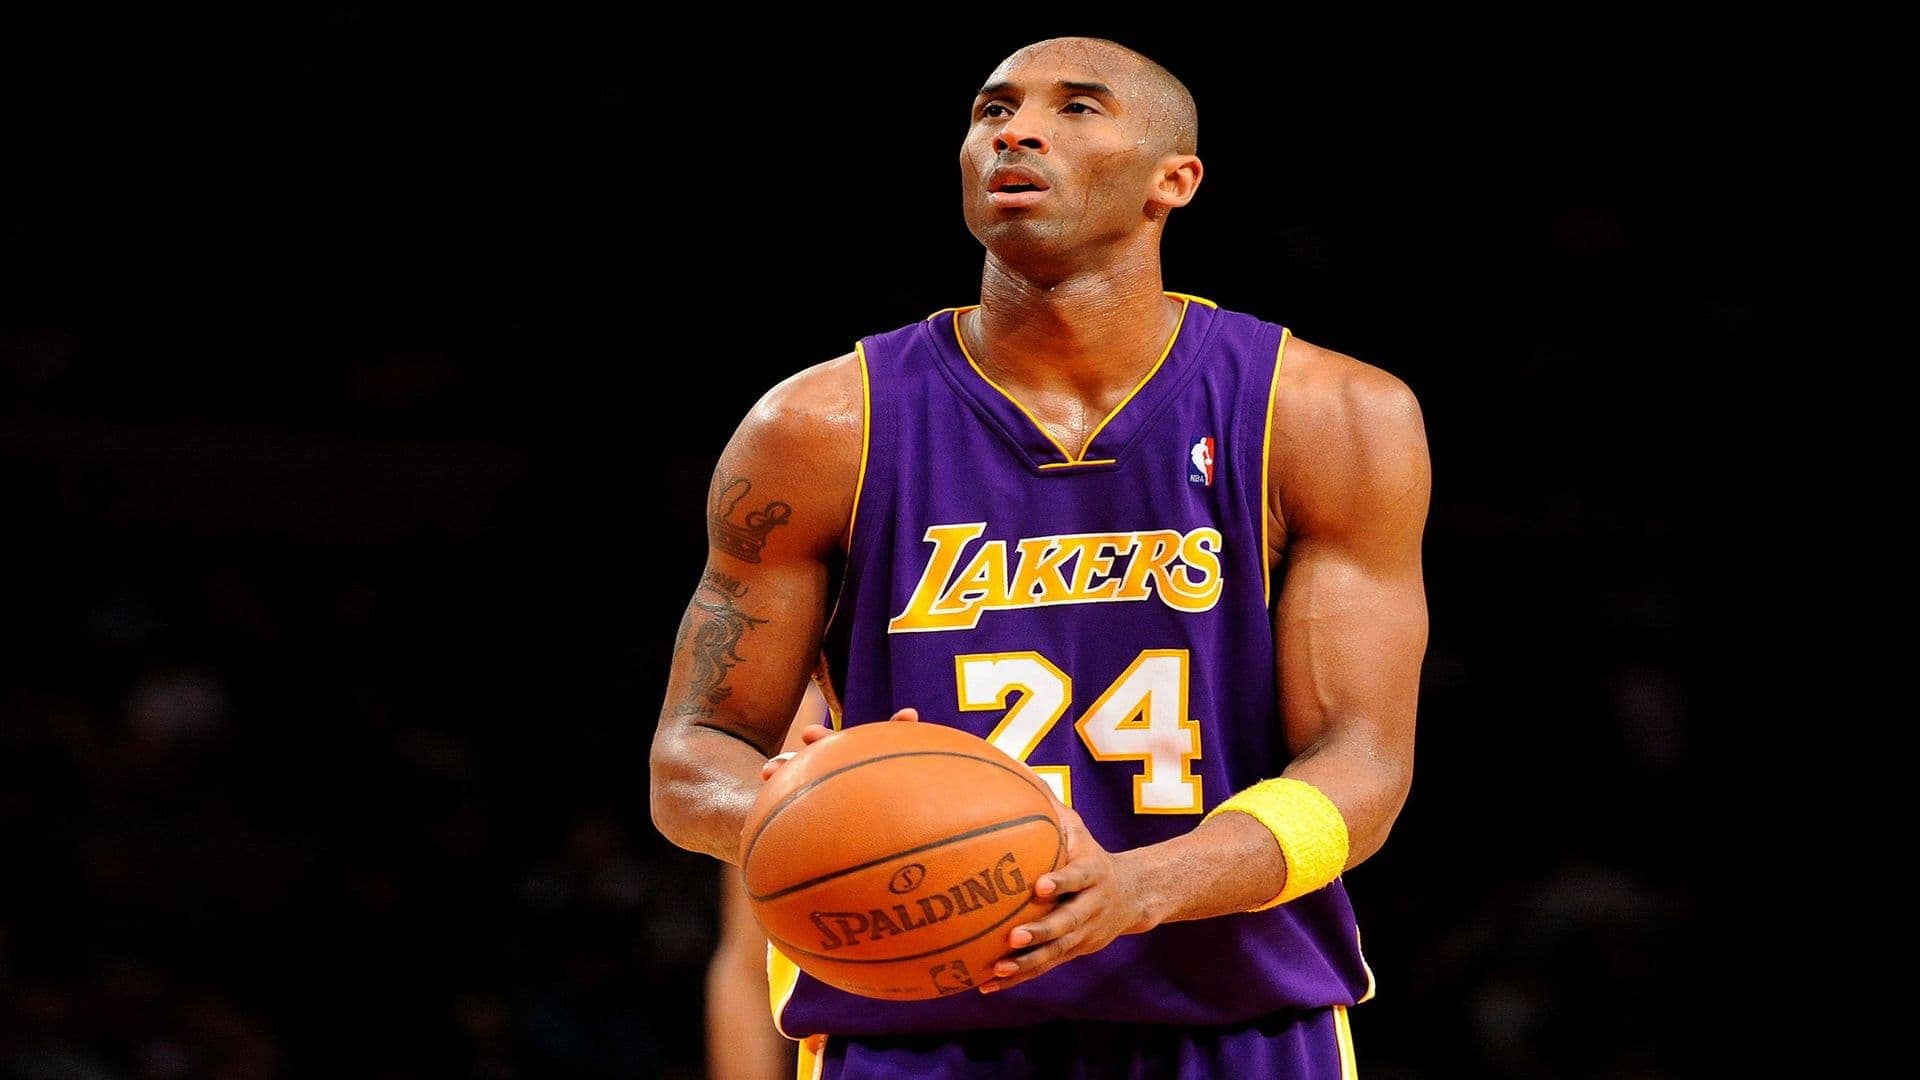 Kobe Bryant - NBA players with 60 point games